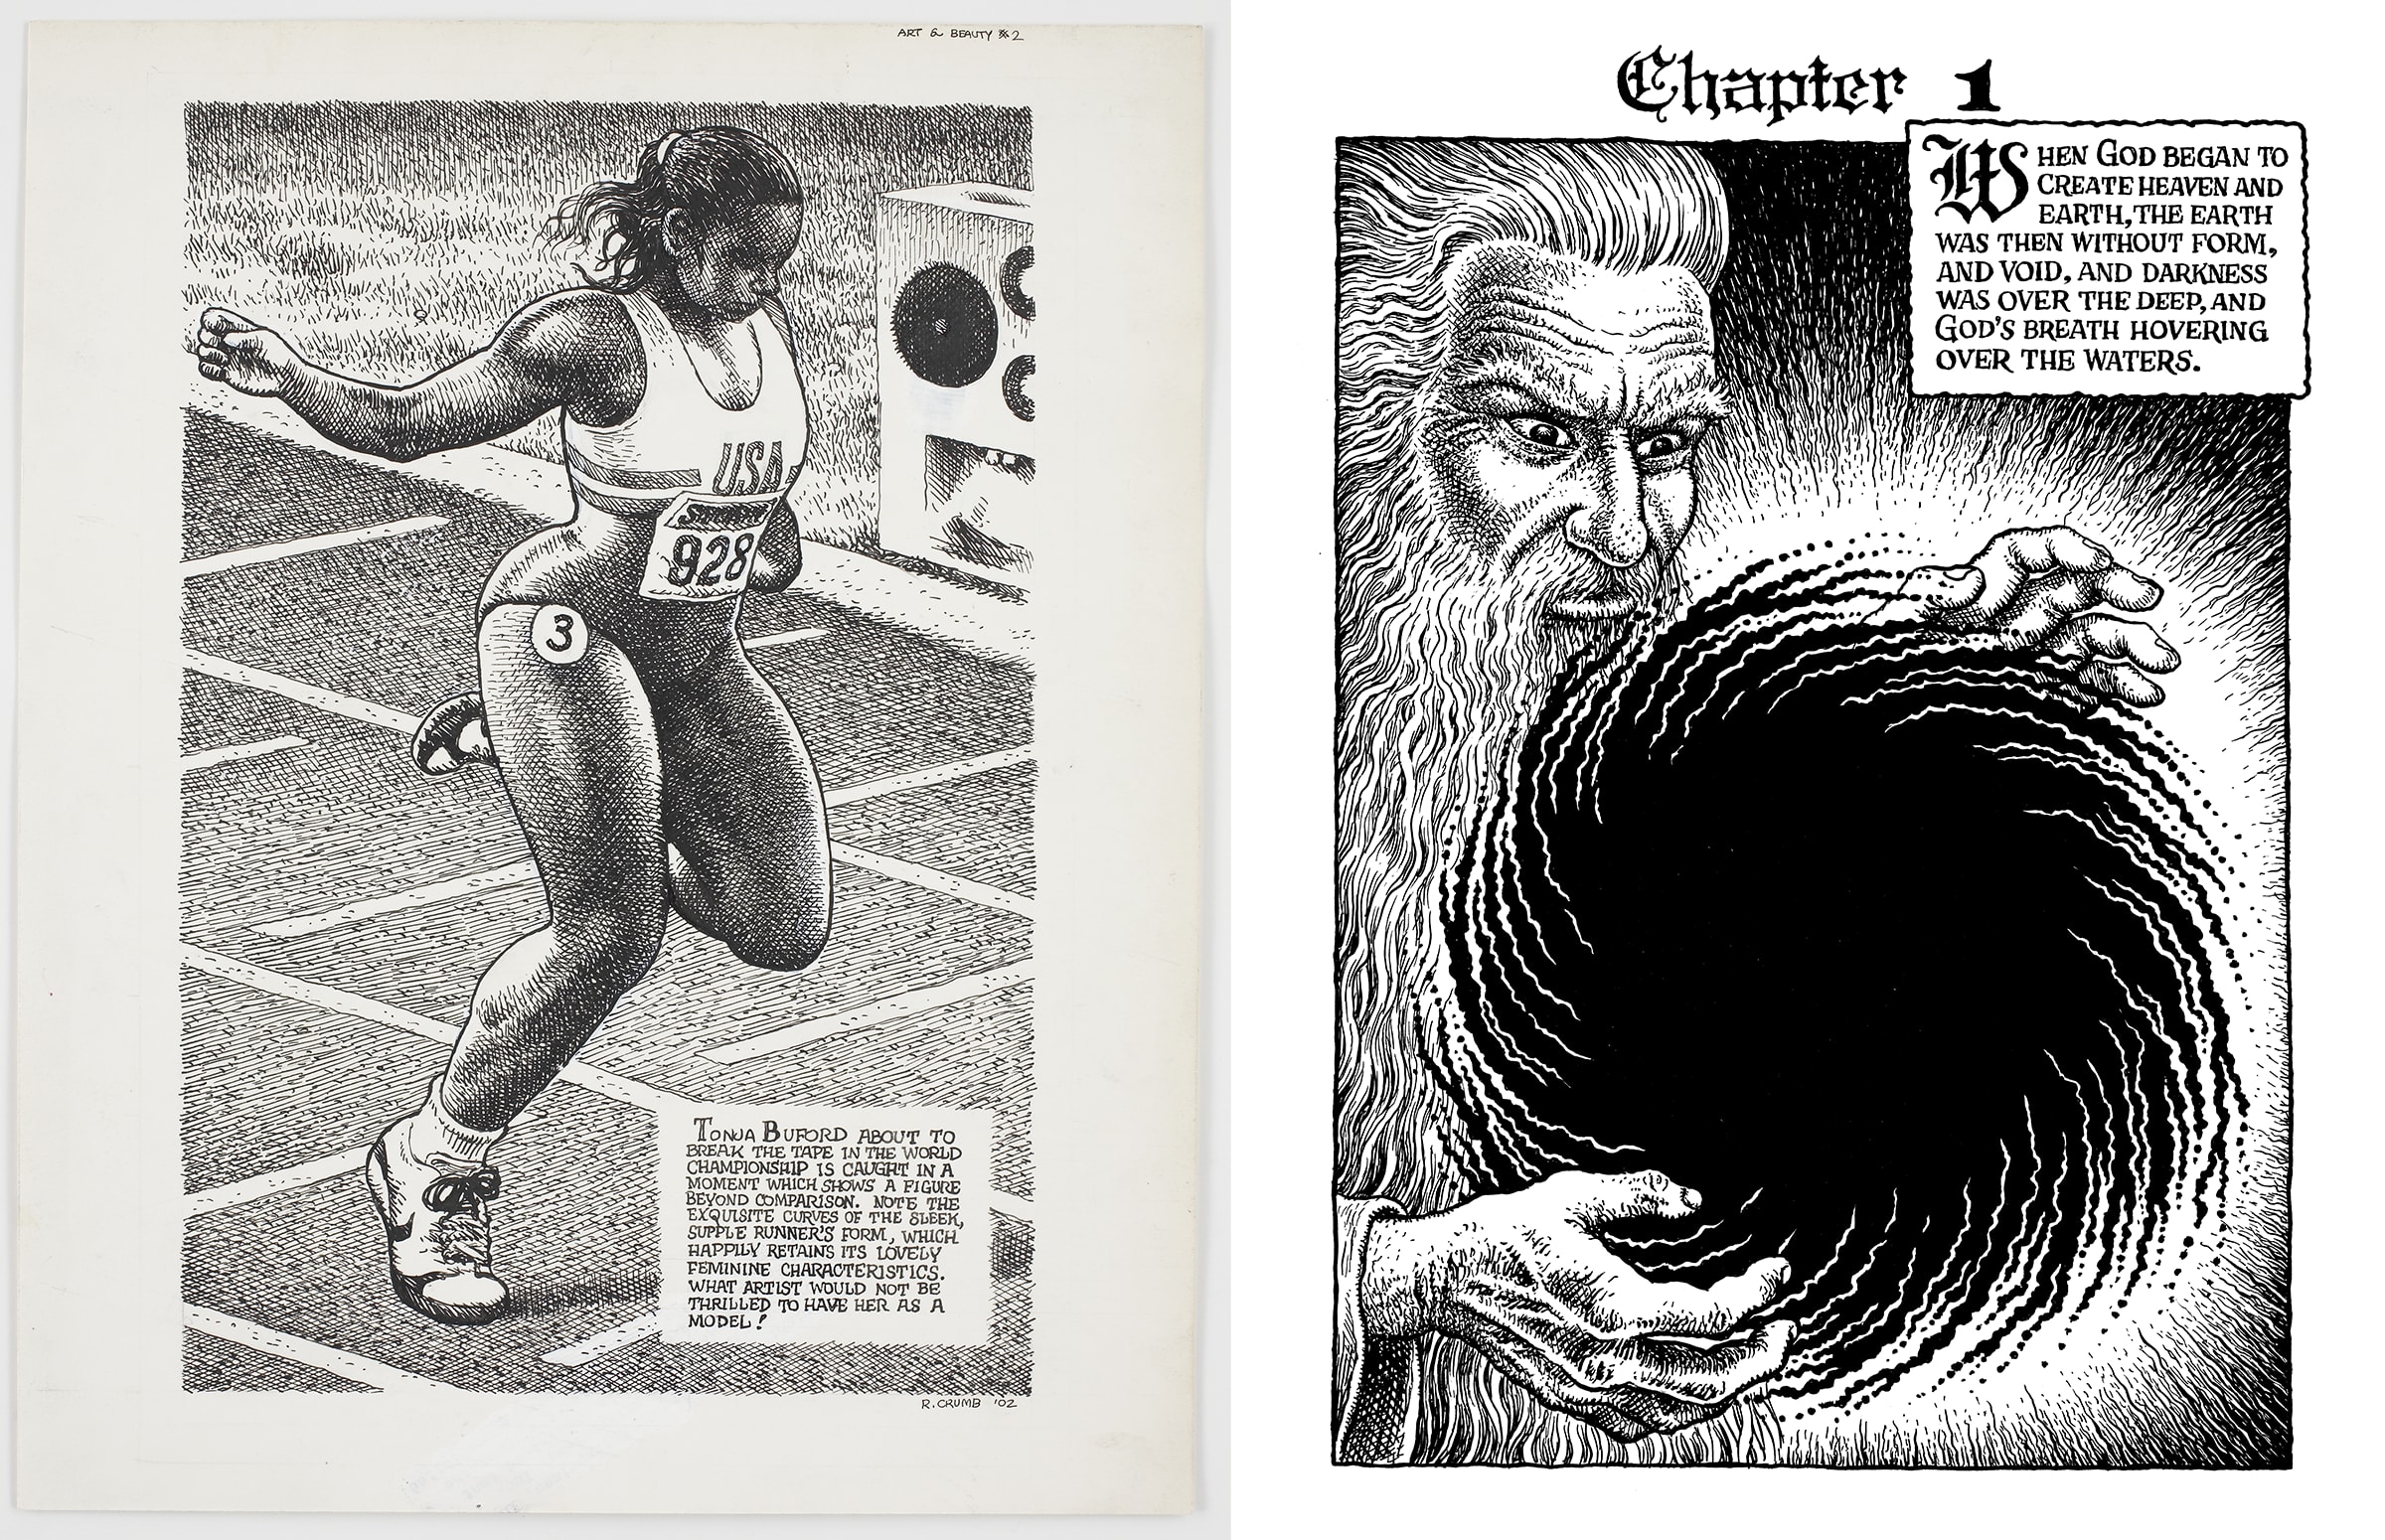 Works by Robert Crumb. Left: Untitled, 2002. Page from “Art & Beauty Magazine, Number 2,” 2003. © Robert Crumb, 2002. Right: The Book of Genesis Illustrated by R. Crumb, 2009. © Robert Crumb, 2009. Courtesy the artist, Paul Morris, and David Zwirner.